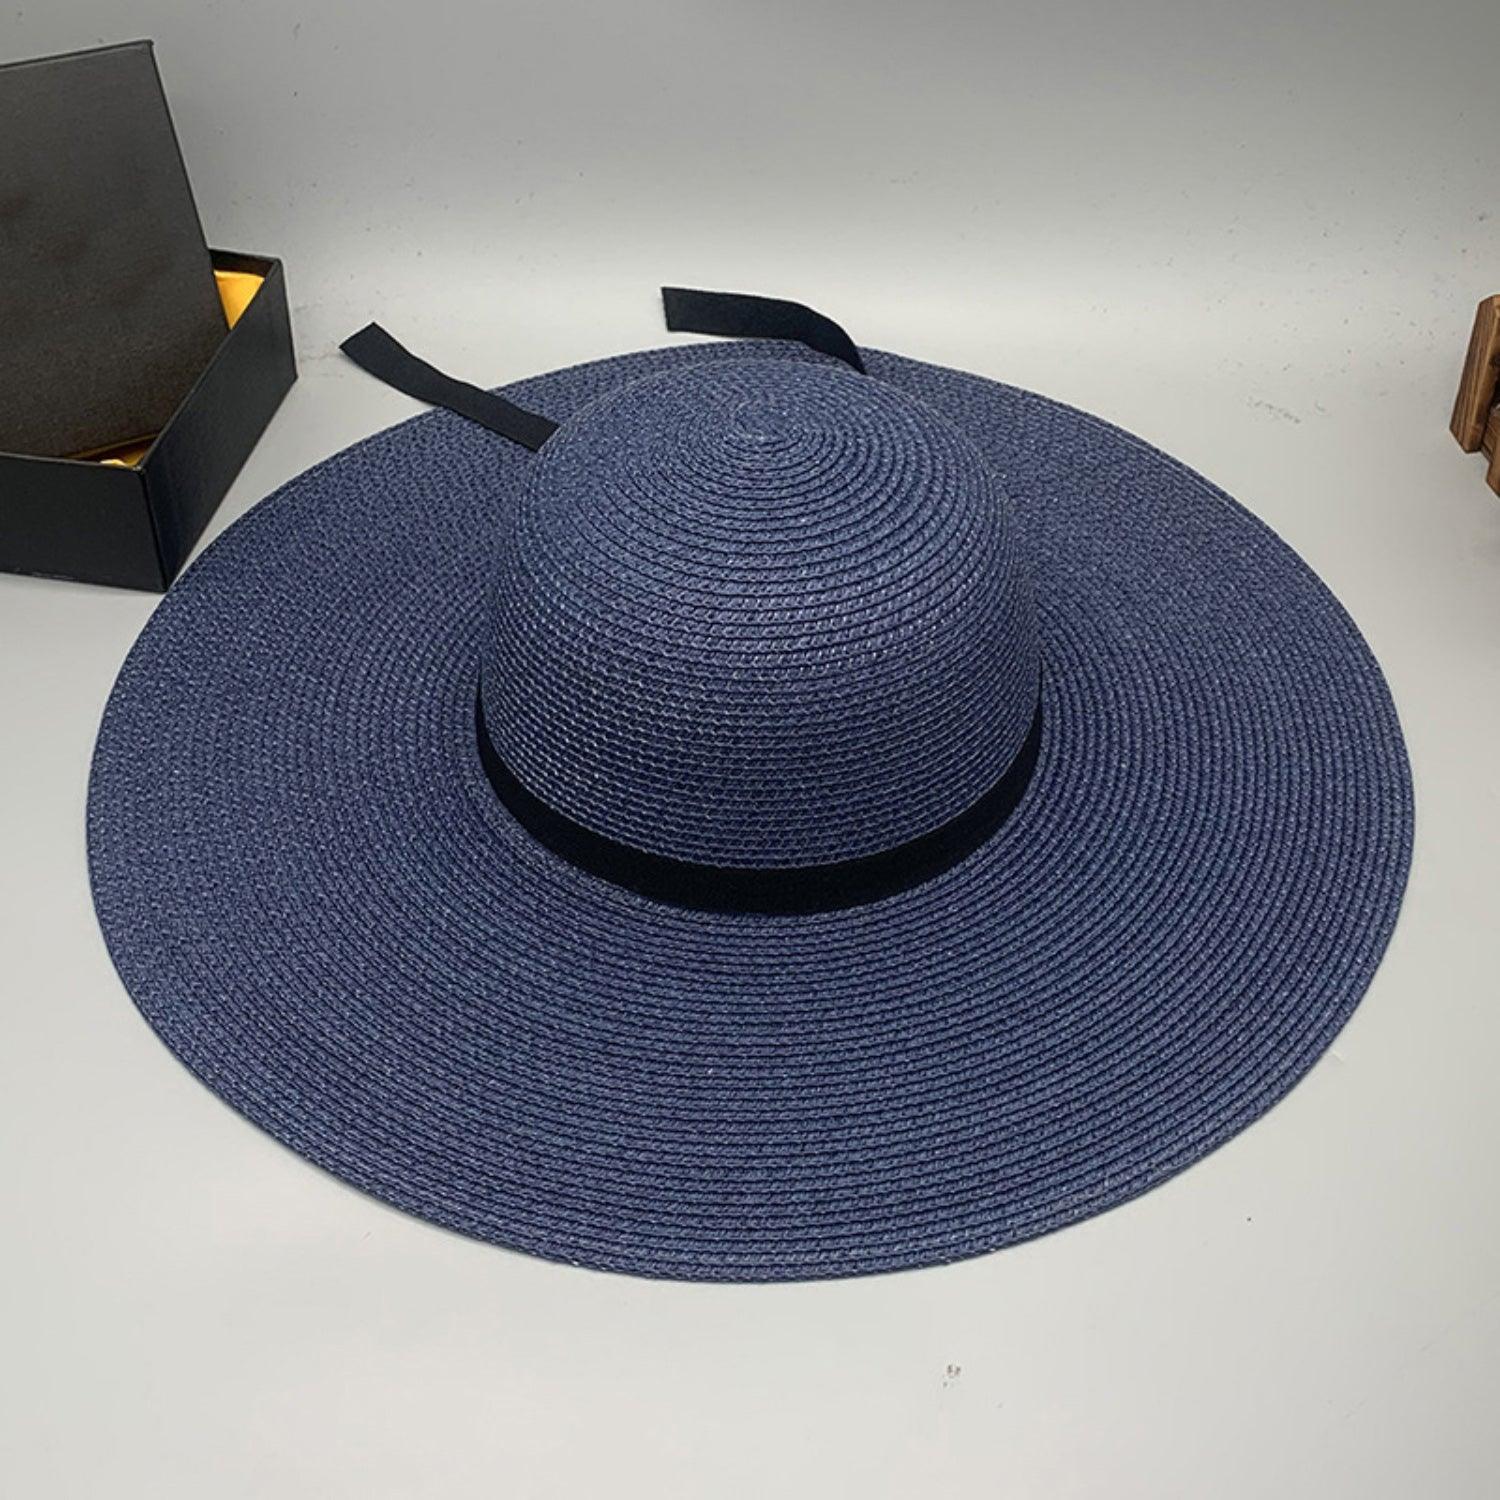 a blue hat sitting next to a box